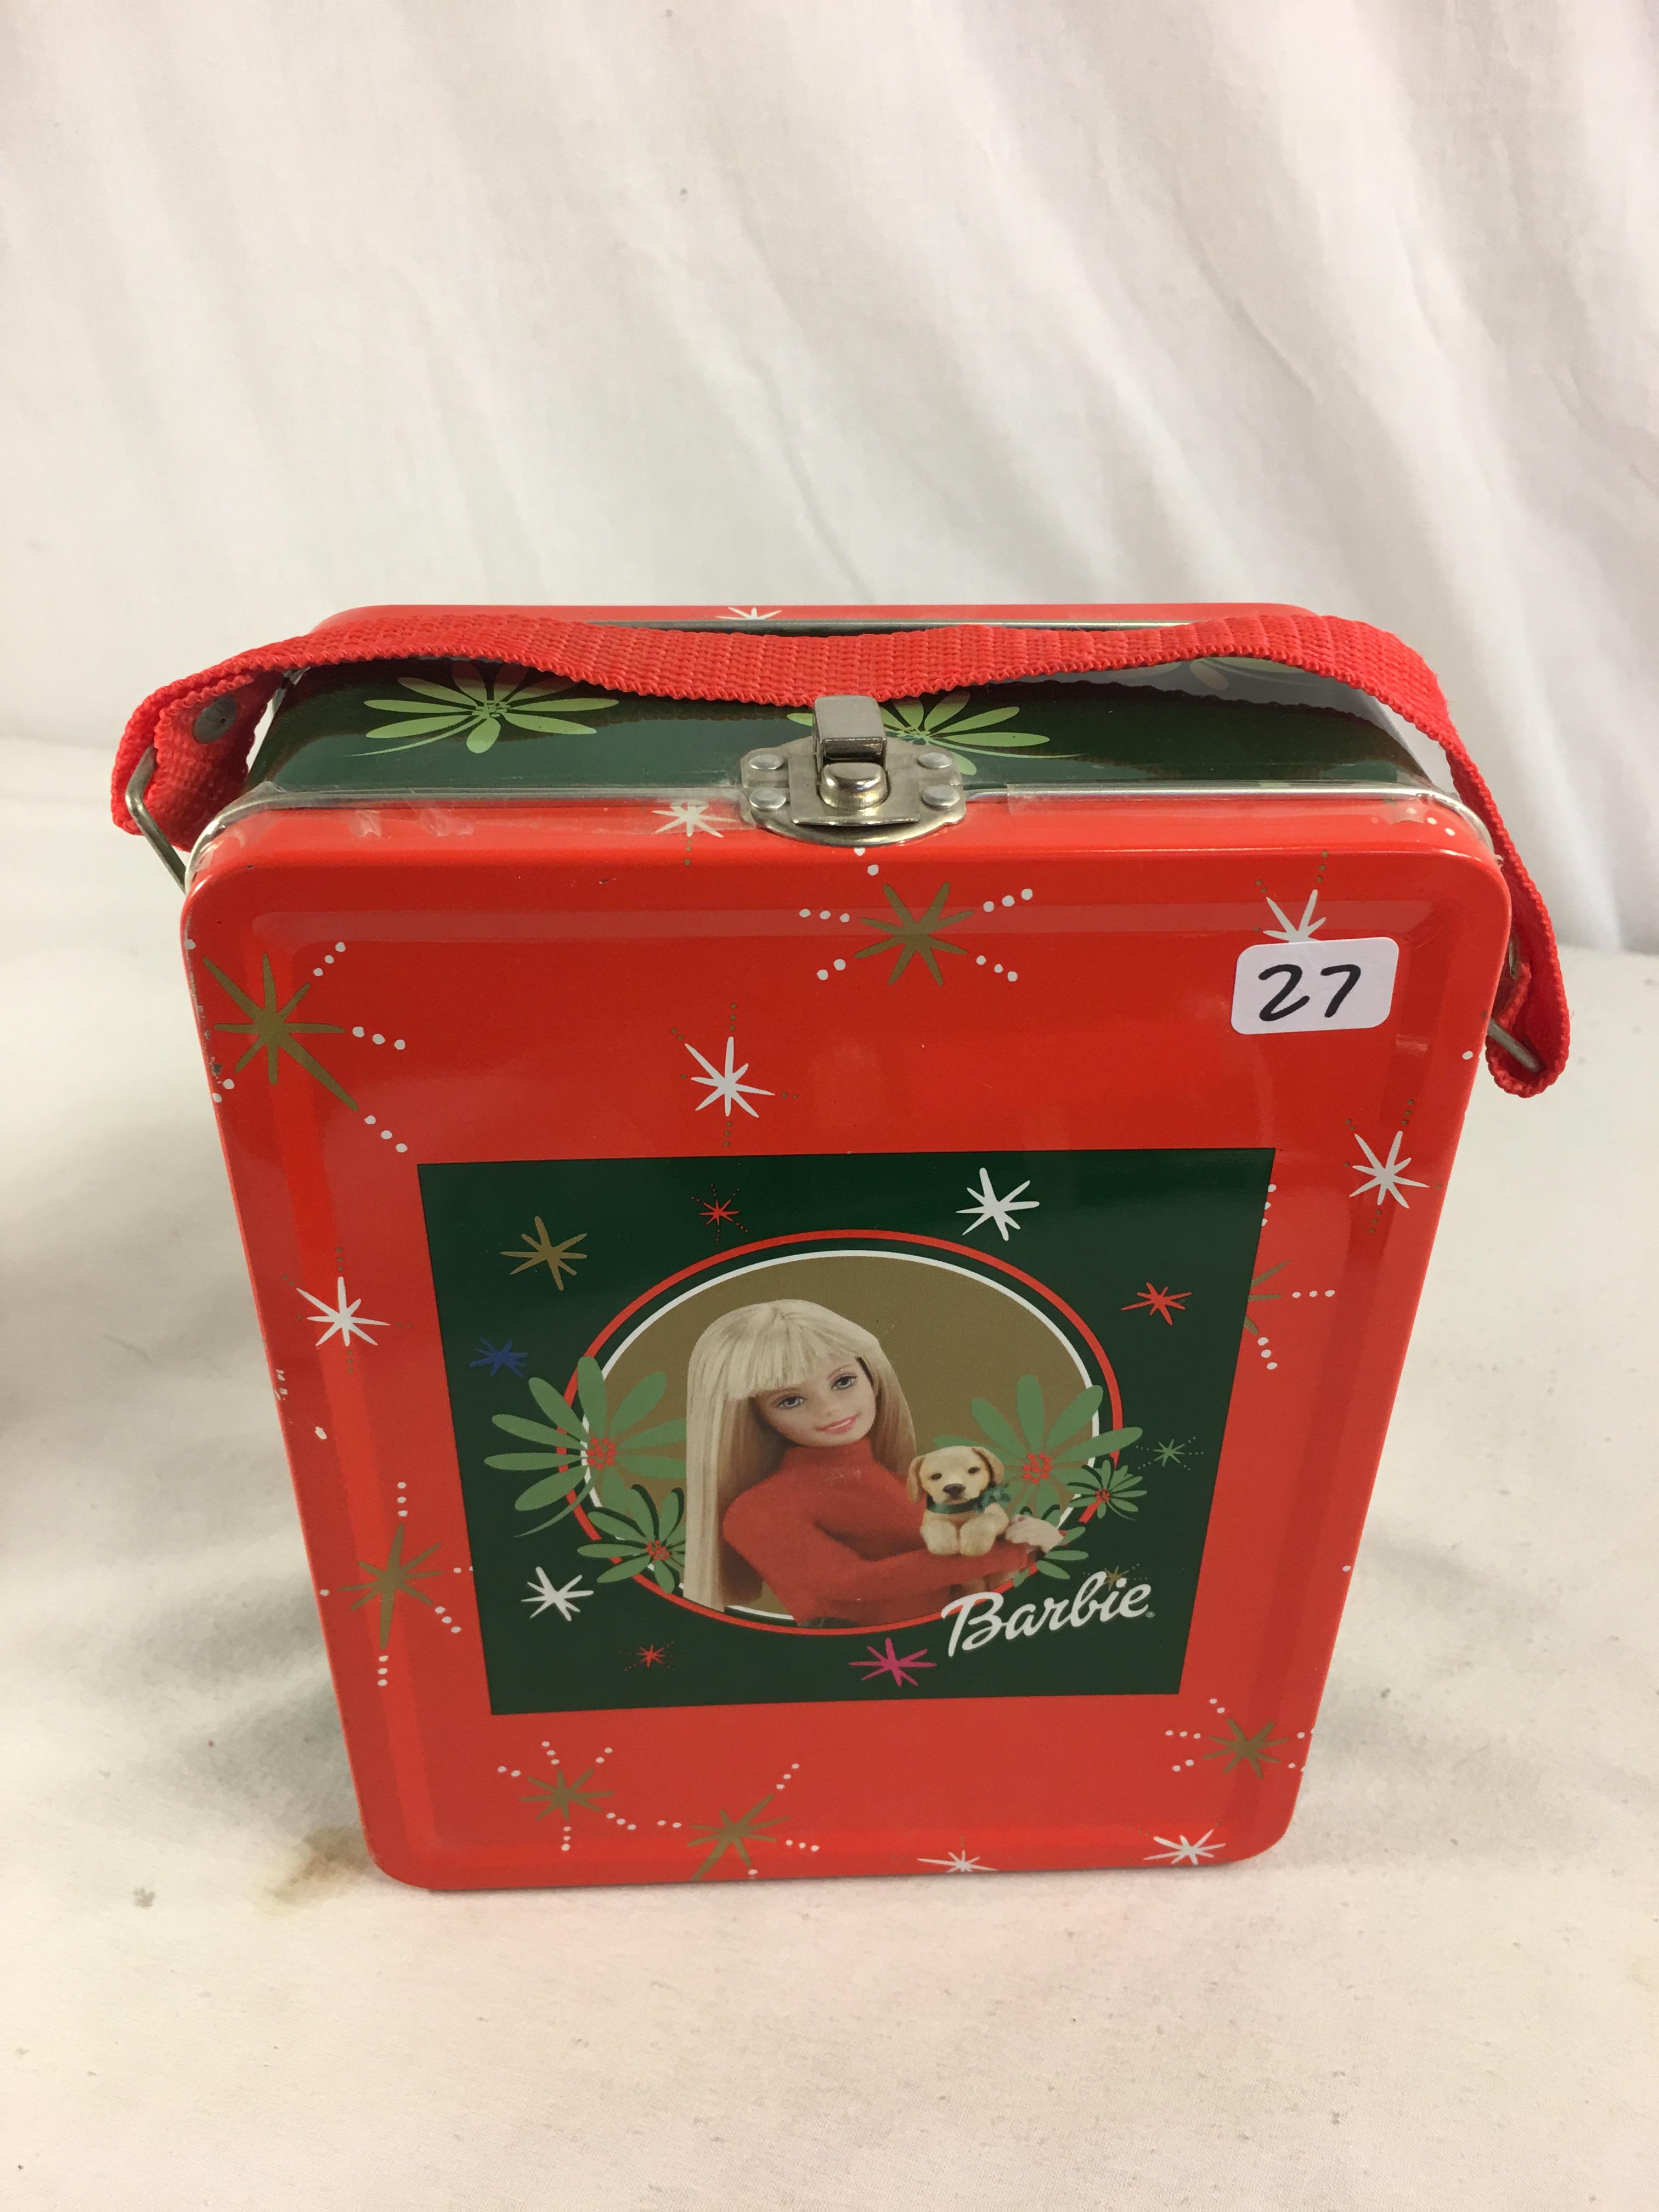 Collector New Sealed Plastic Barbie Mattel Tin Lunch Box Size: 7.3/4" by 6"